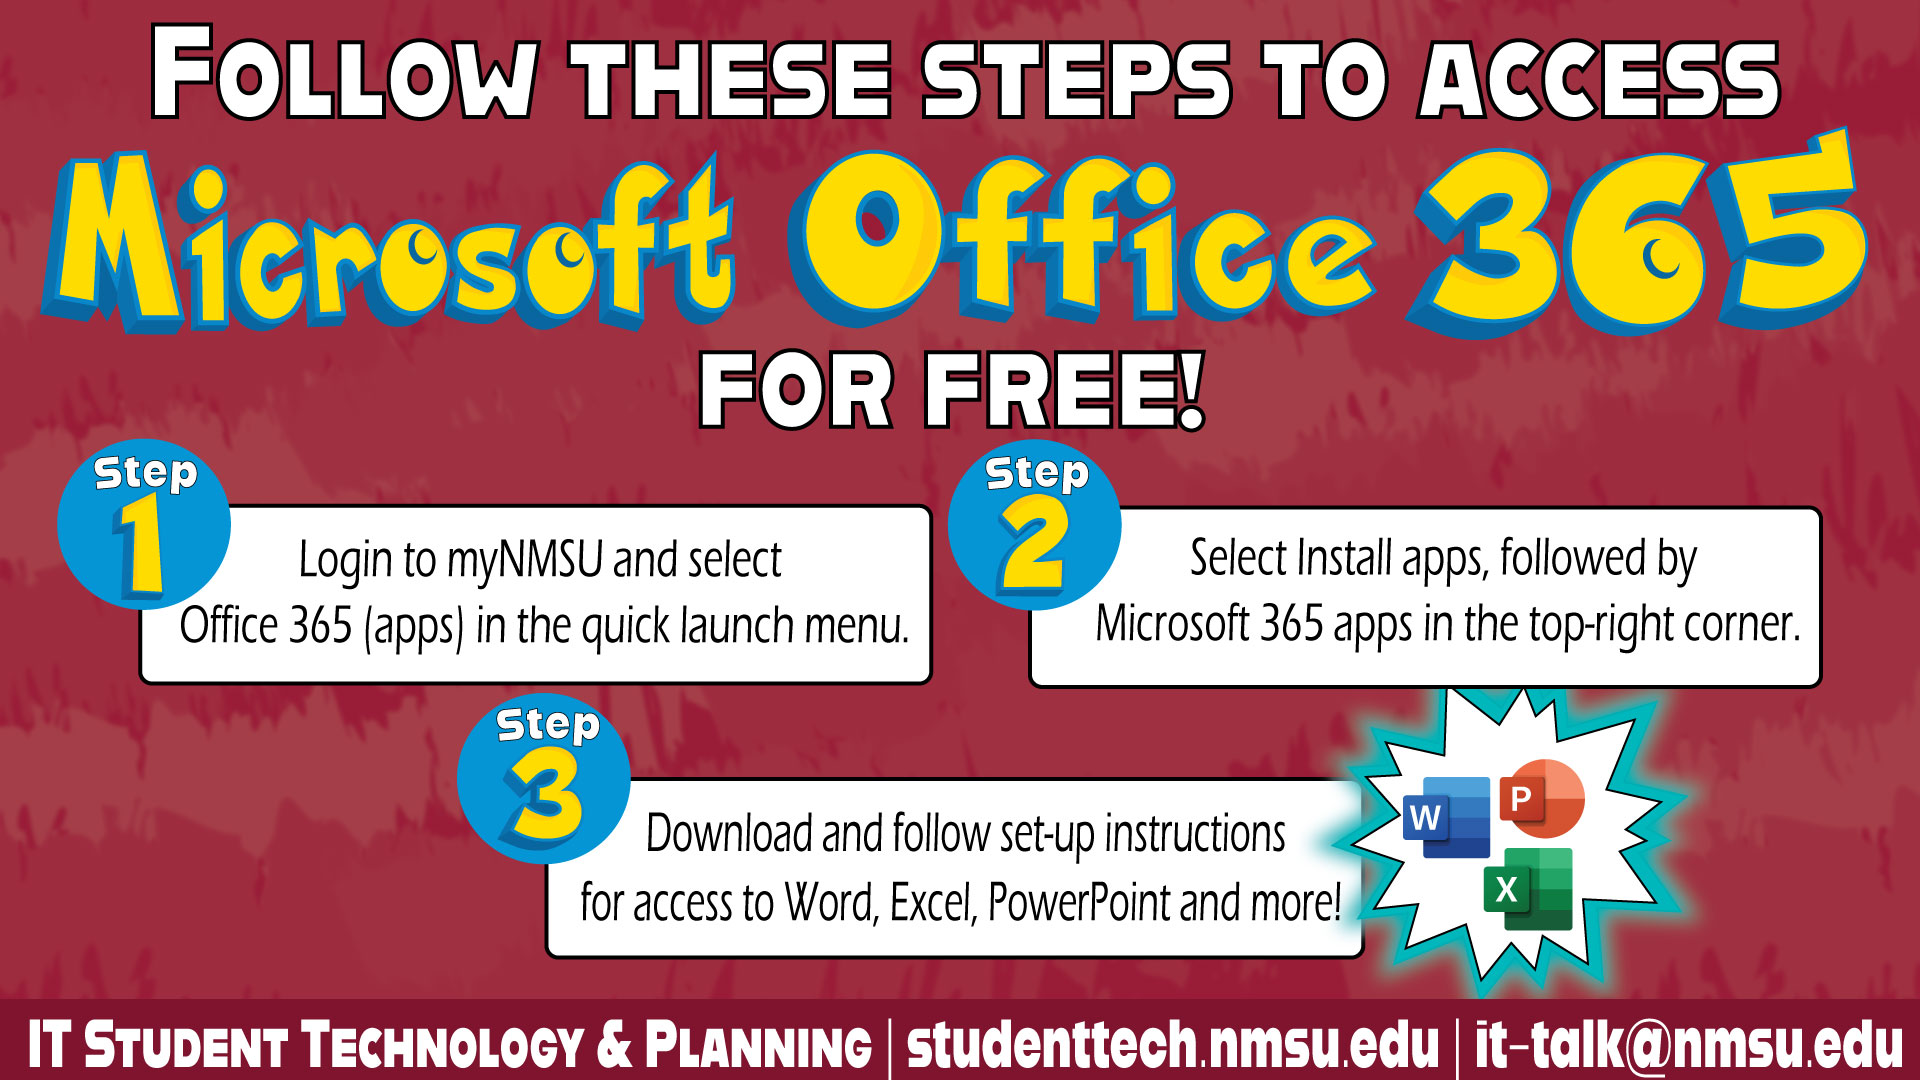 Follow these steps to access Microsoft Office 365 for free! Login to myNMSU and select Office 365 Apps in the quick launch menu. Select Install Apps, followed by Microsoft 365 apps in the top-right corner. Download and follow set-up instructions for access to Word, Excel, PowerPoint, and more!